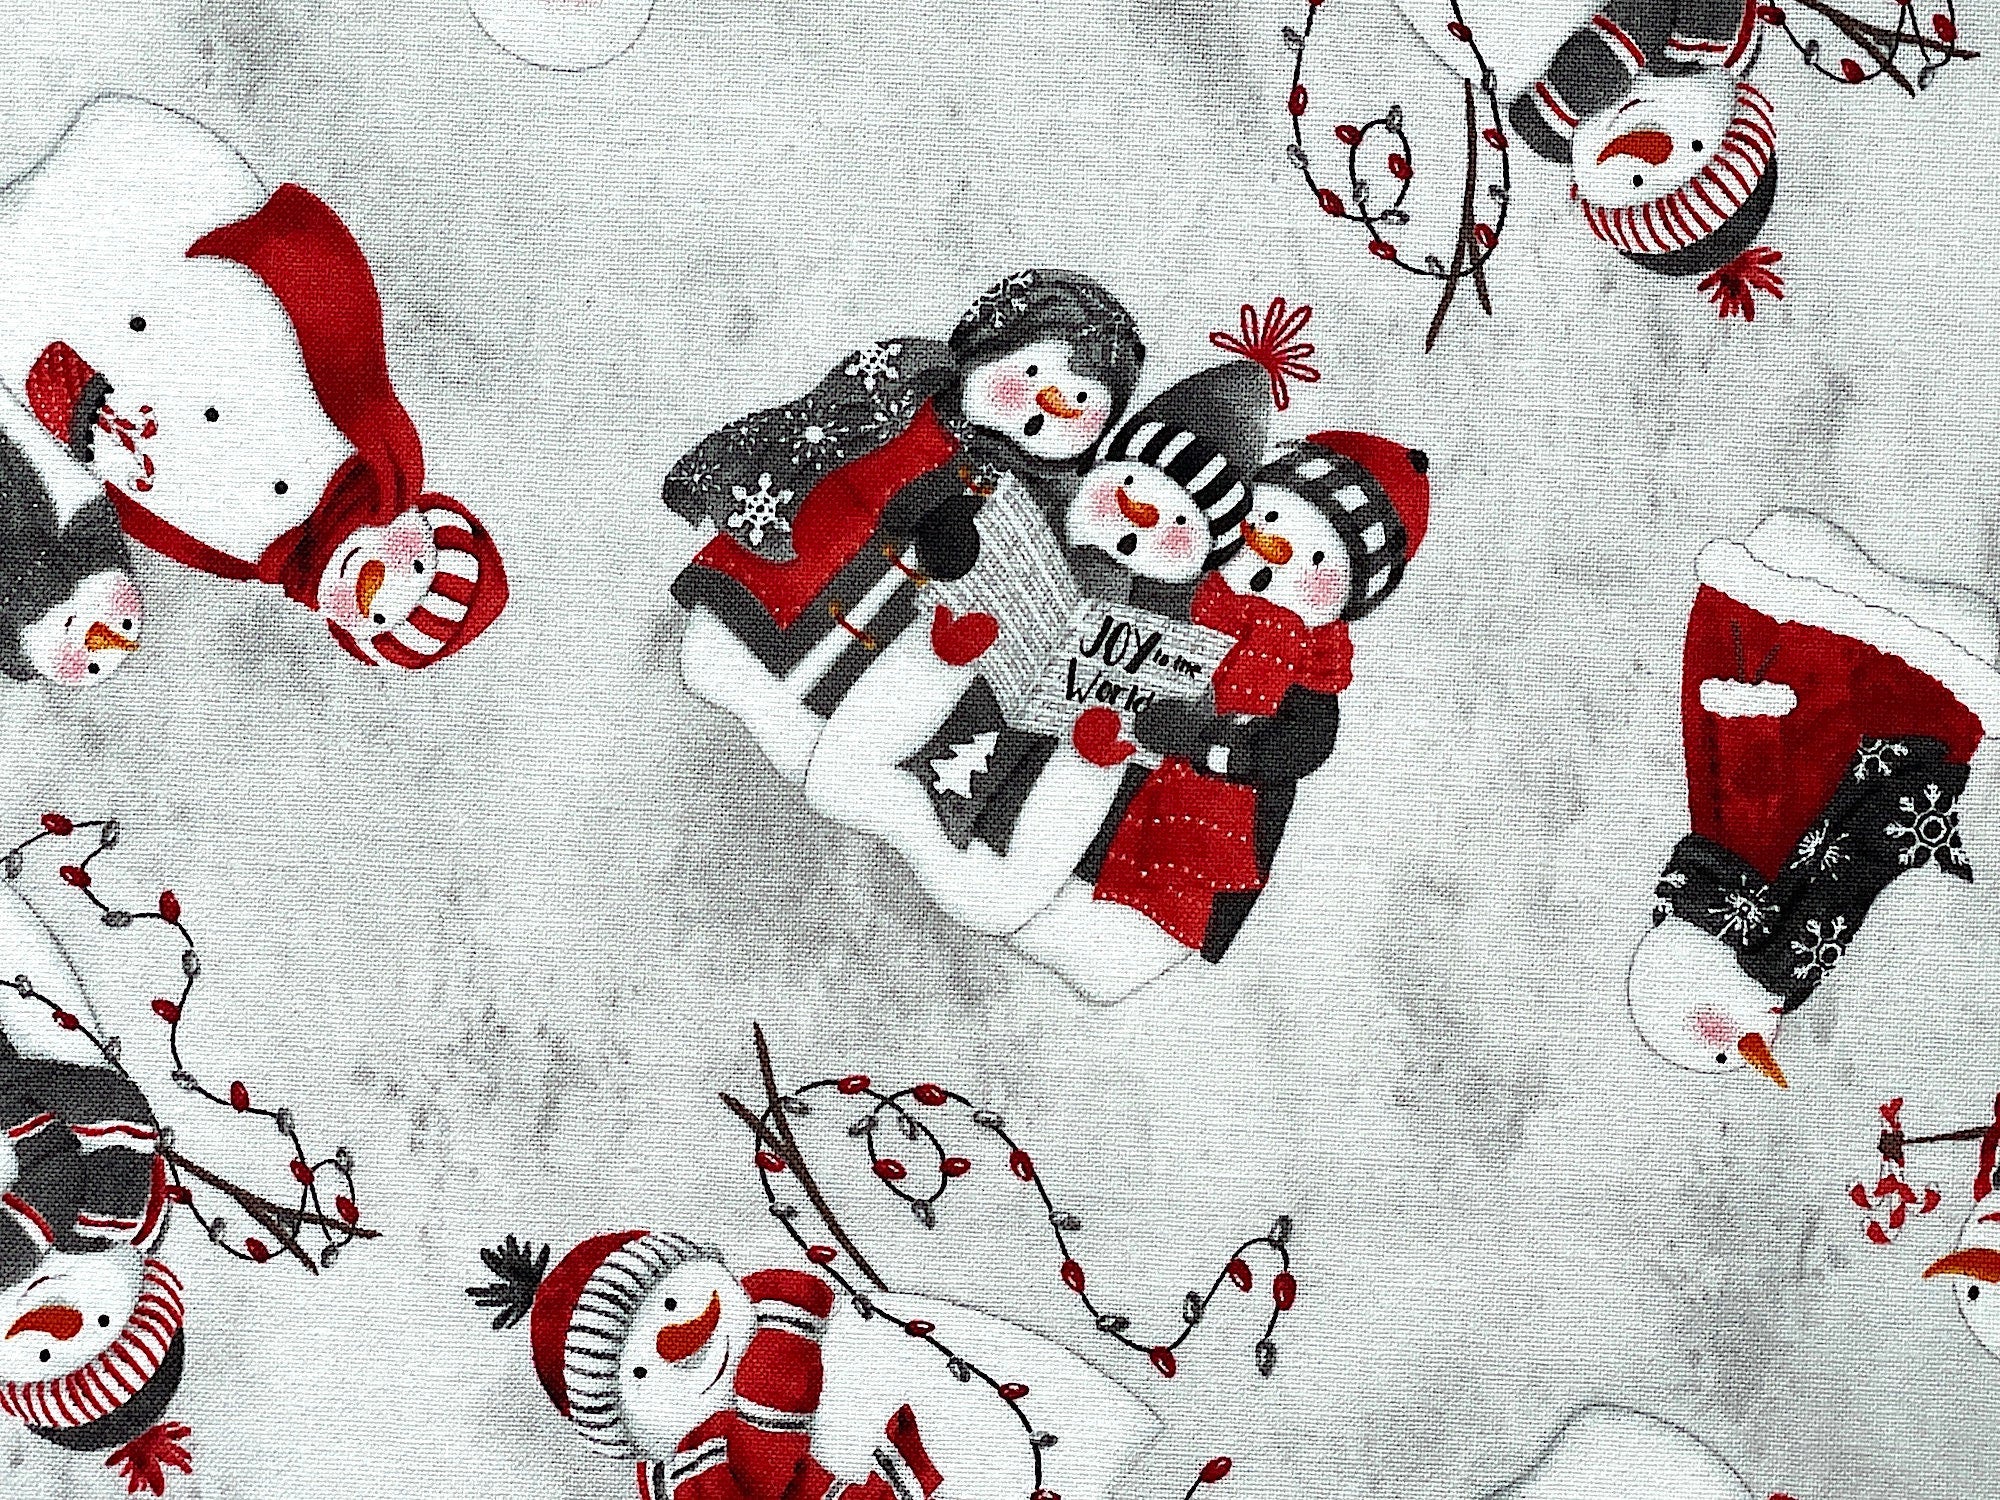 This fabric has a white and grey background and is covered with snowmen. Some of the snowmen have Christmas lights, some are singing and others are just standing.